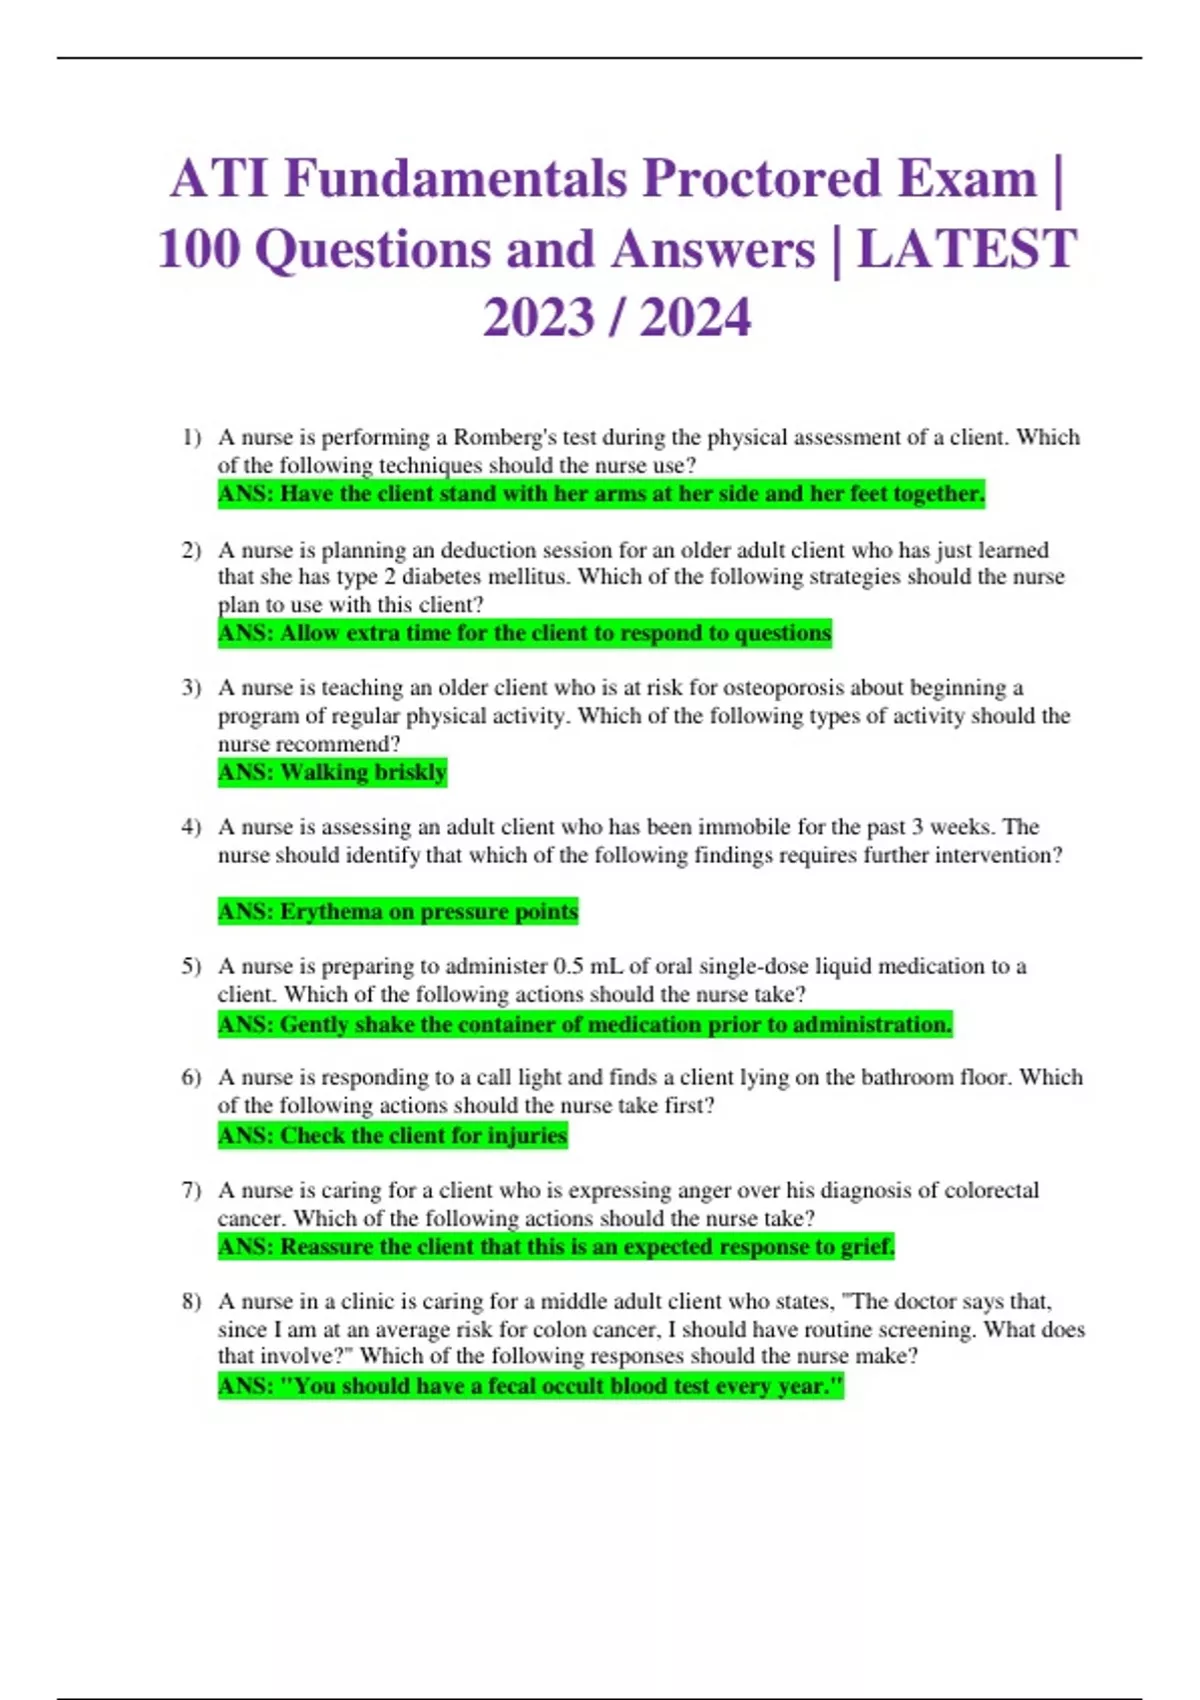 ATI Fundamentals Proctored Exam 100 Questions and Answers LATEST